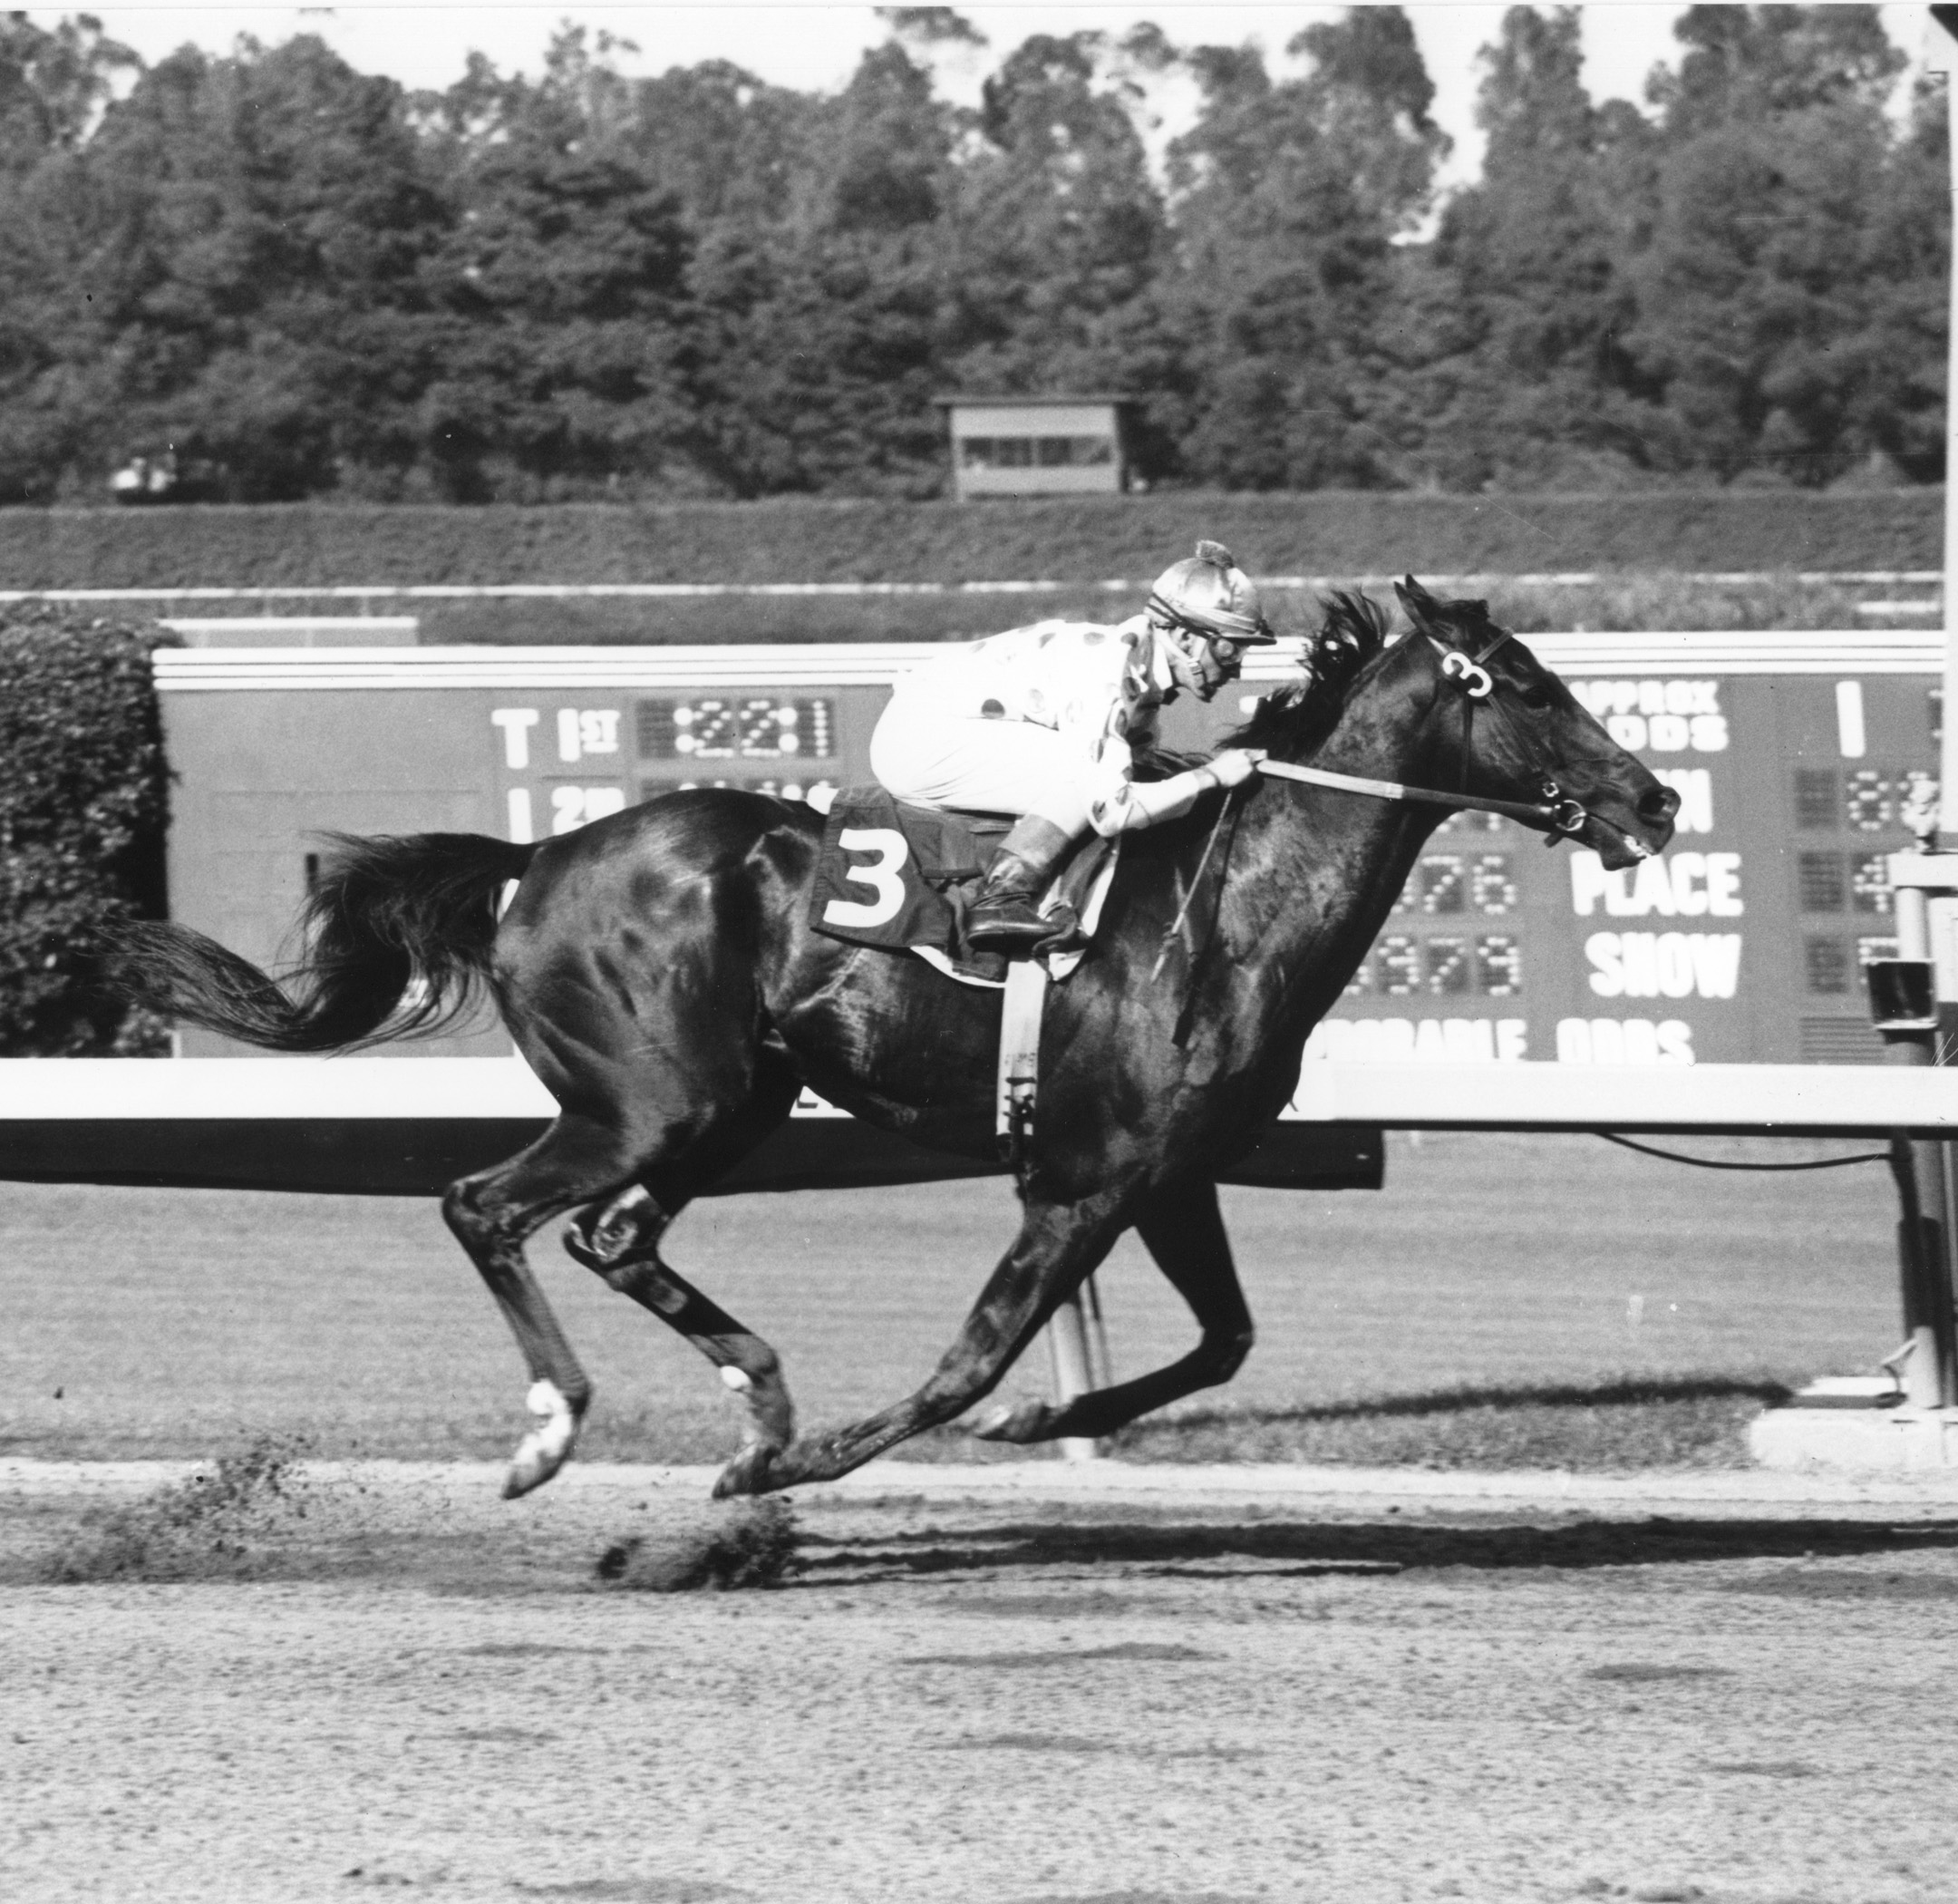 Native Diver (Jerry Lambert up) winning the 1965 Hollywood Gold Cup at Hollywood Park (Stidham & Assoc./Museum Collection)